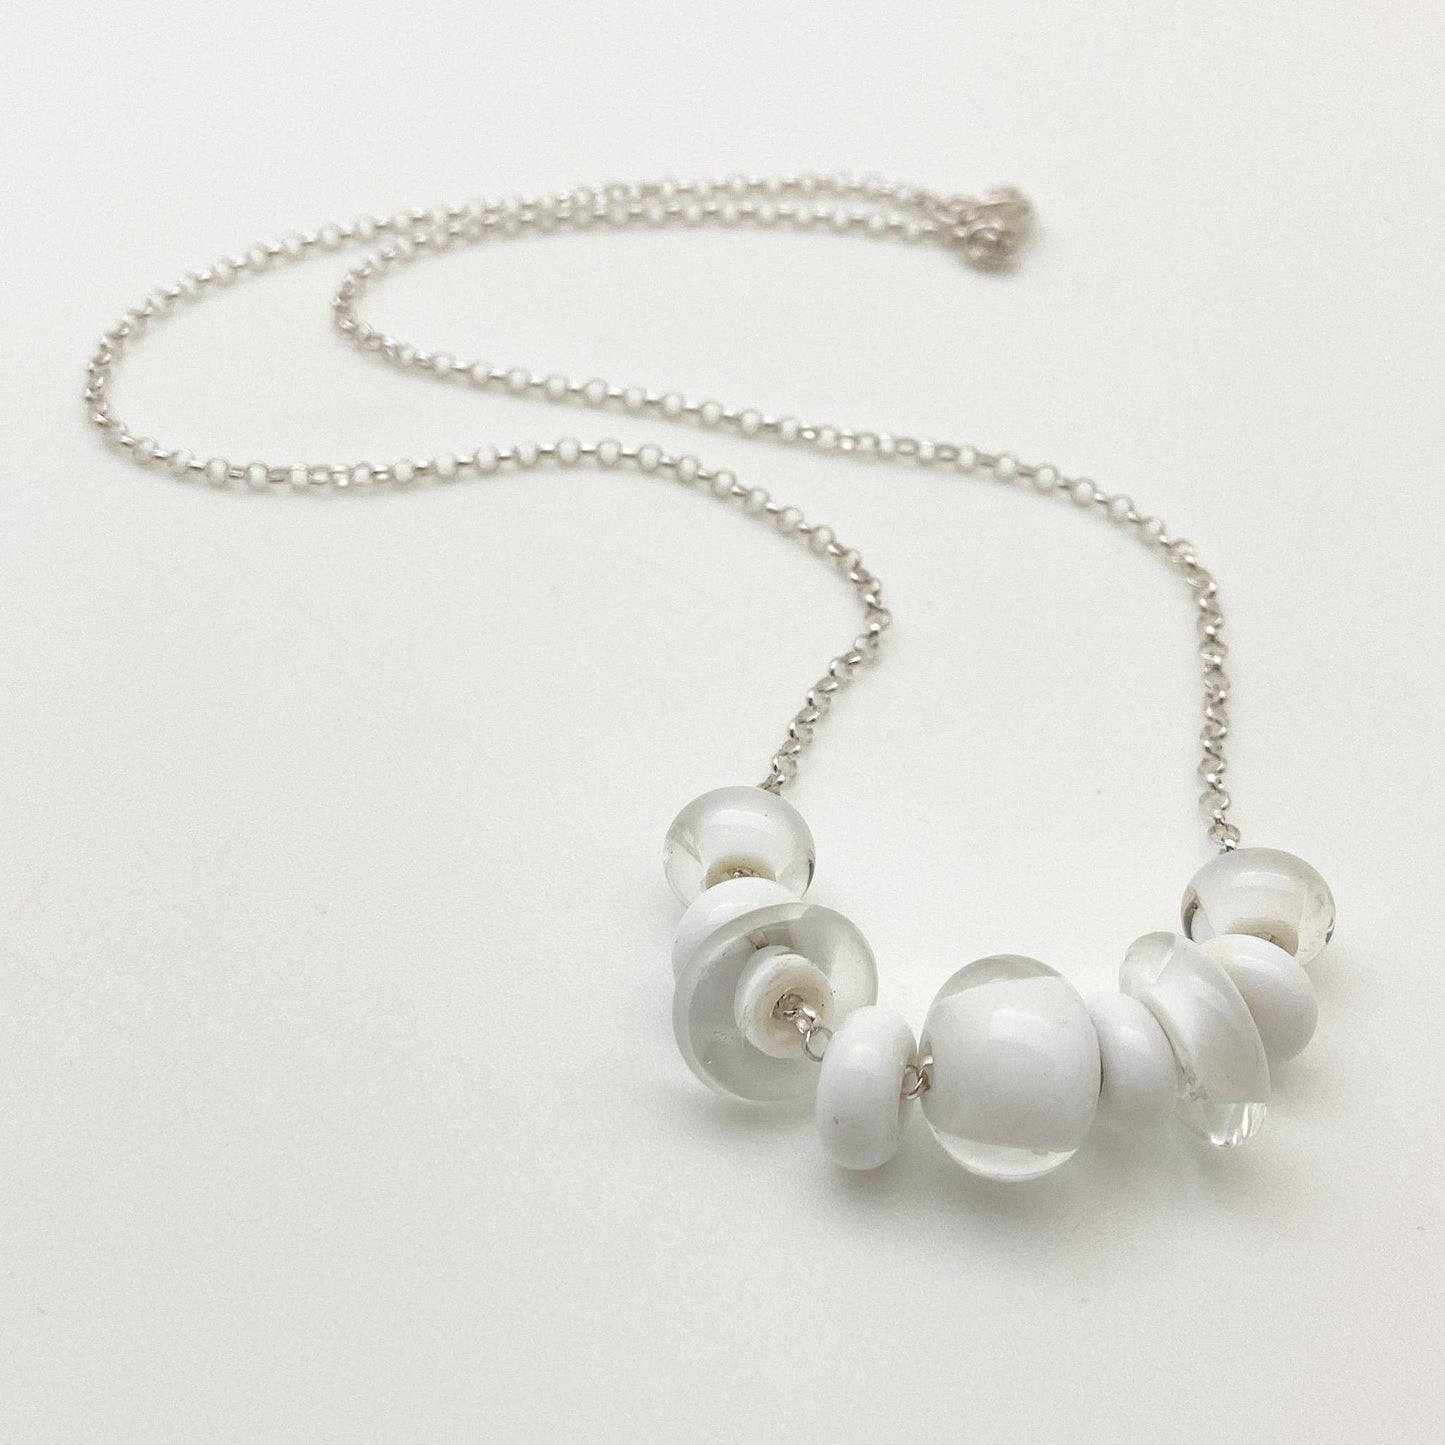 Necklace - Glass "Lifesaver" Beads - White